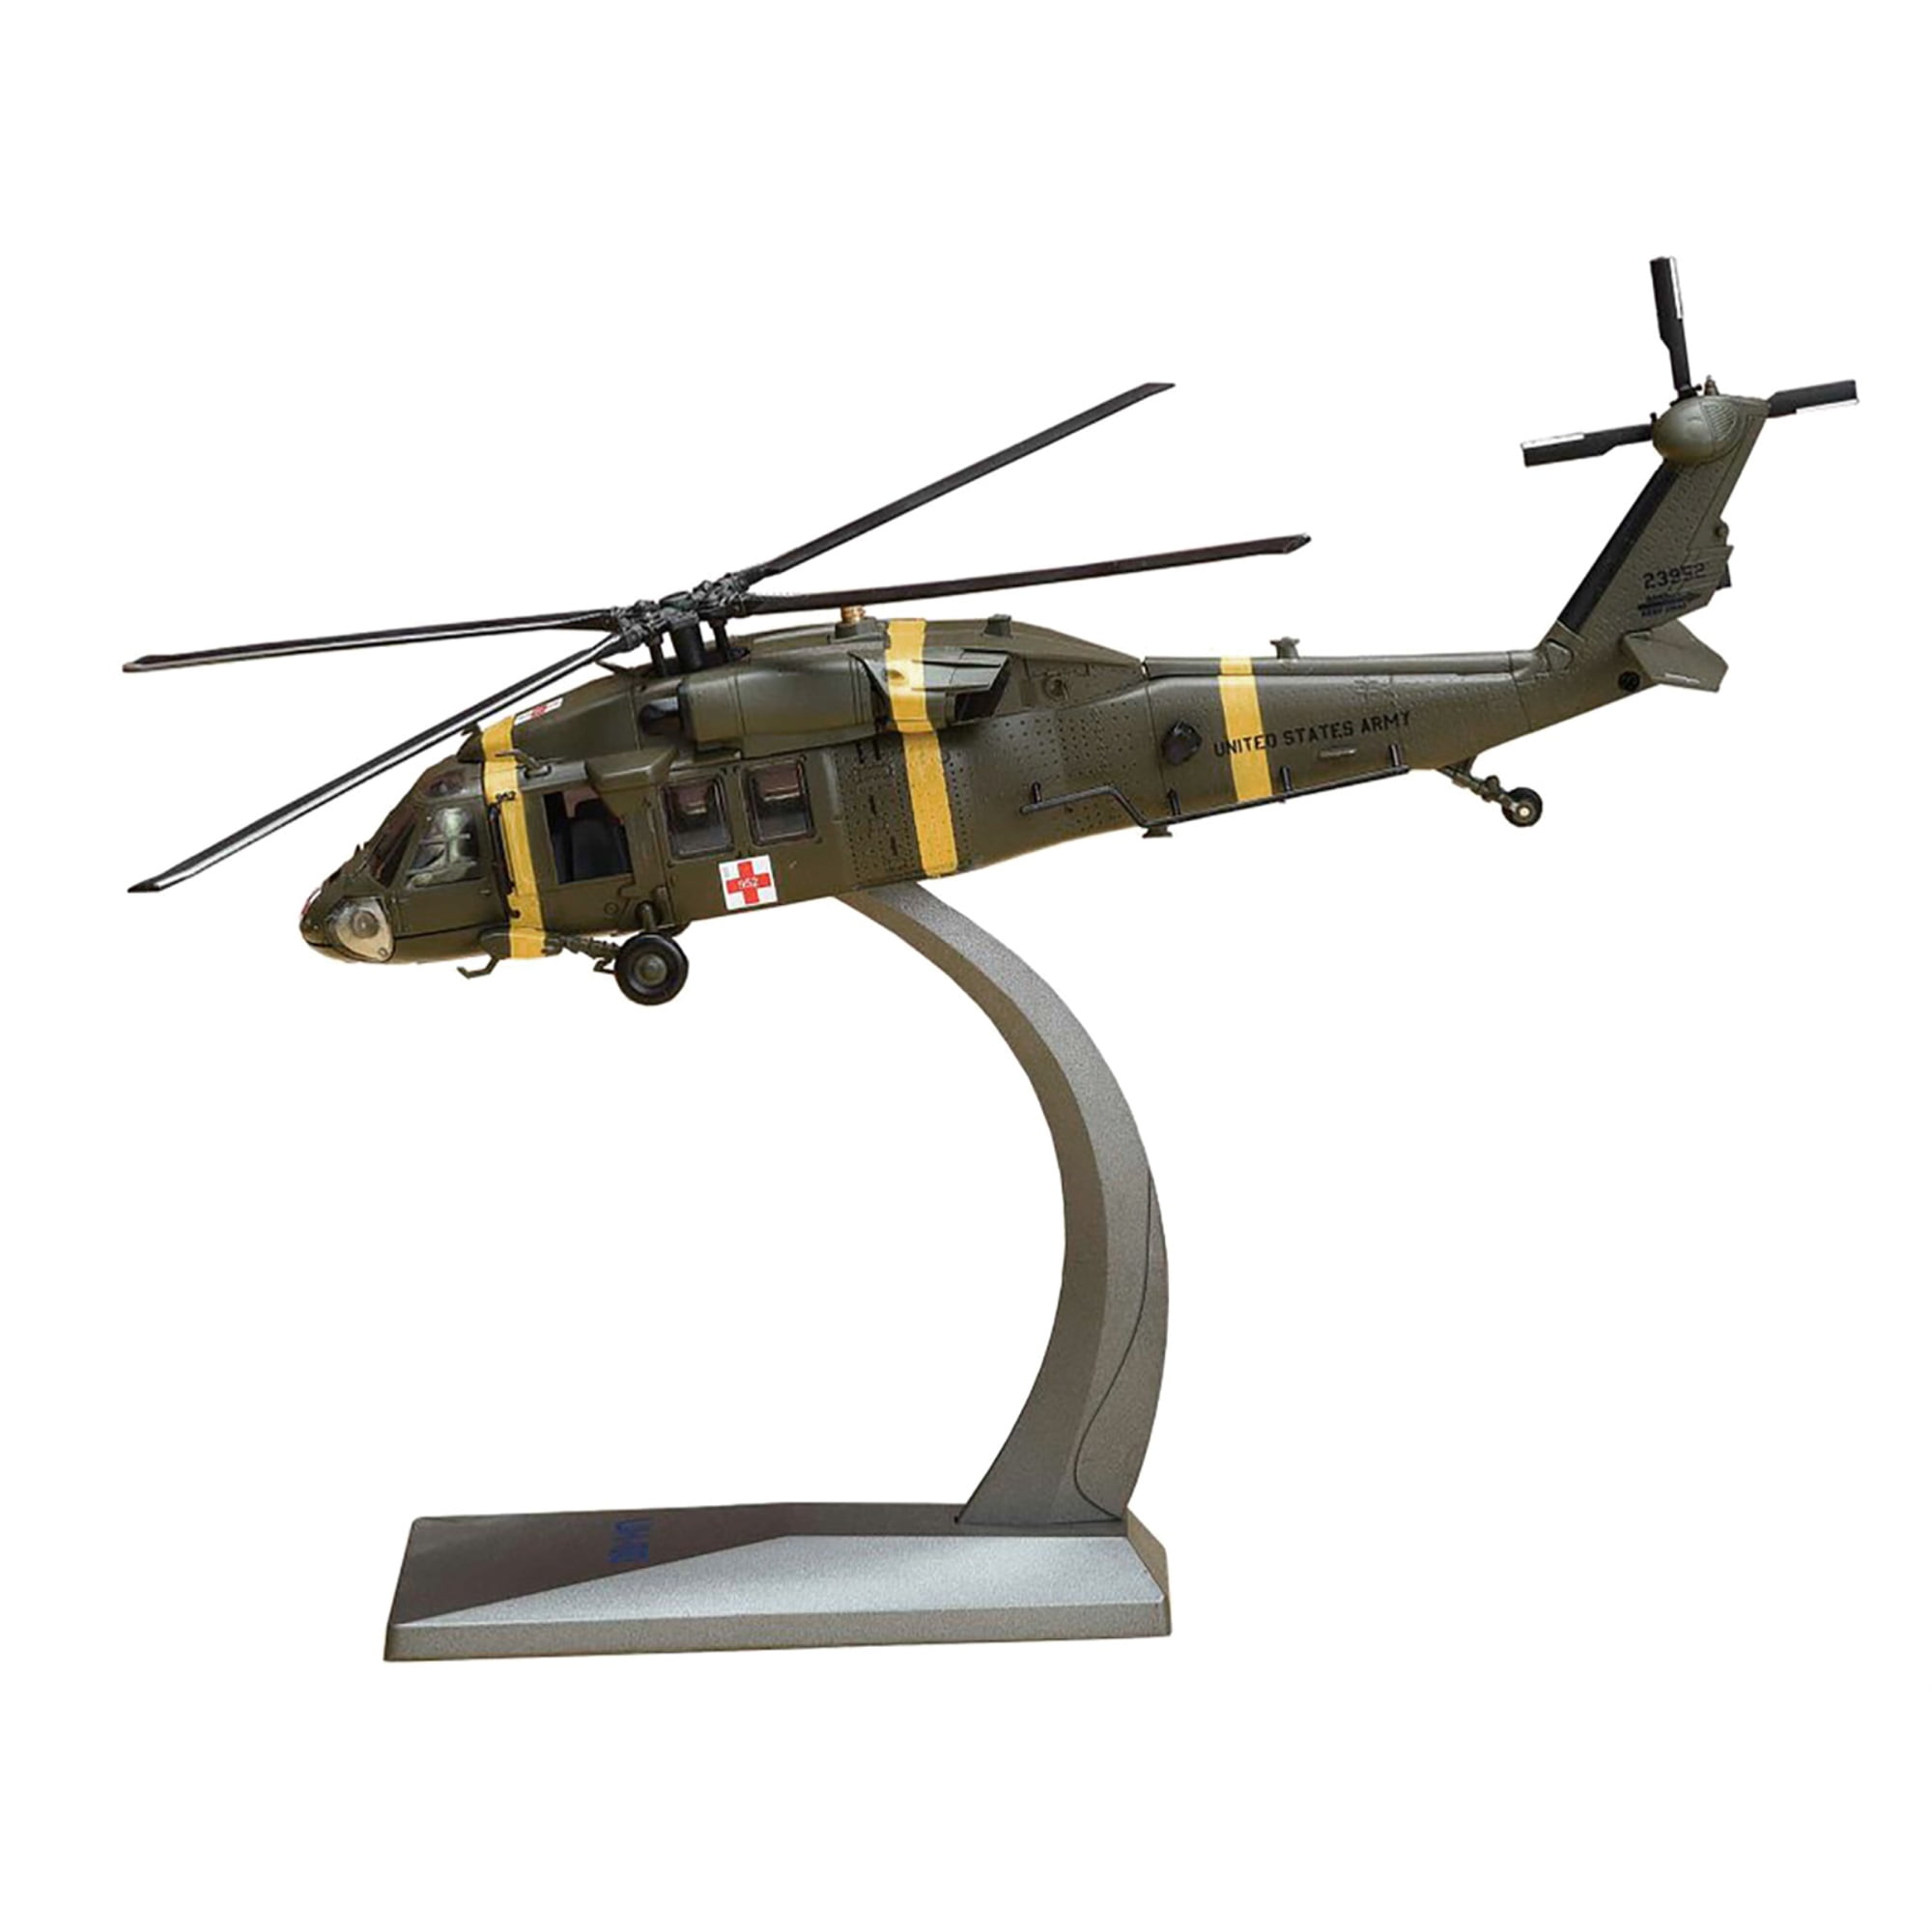 Strategy Agon 1-72 Scale Sikorsky UH-60 Black Hawk 377th Medical Co Camp Humphreys South Korea United States Army 2007 Diecast Model Helicopte